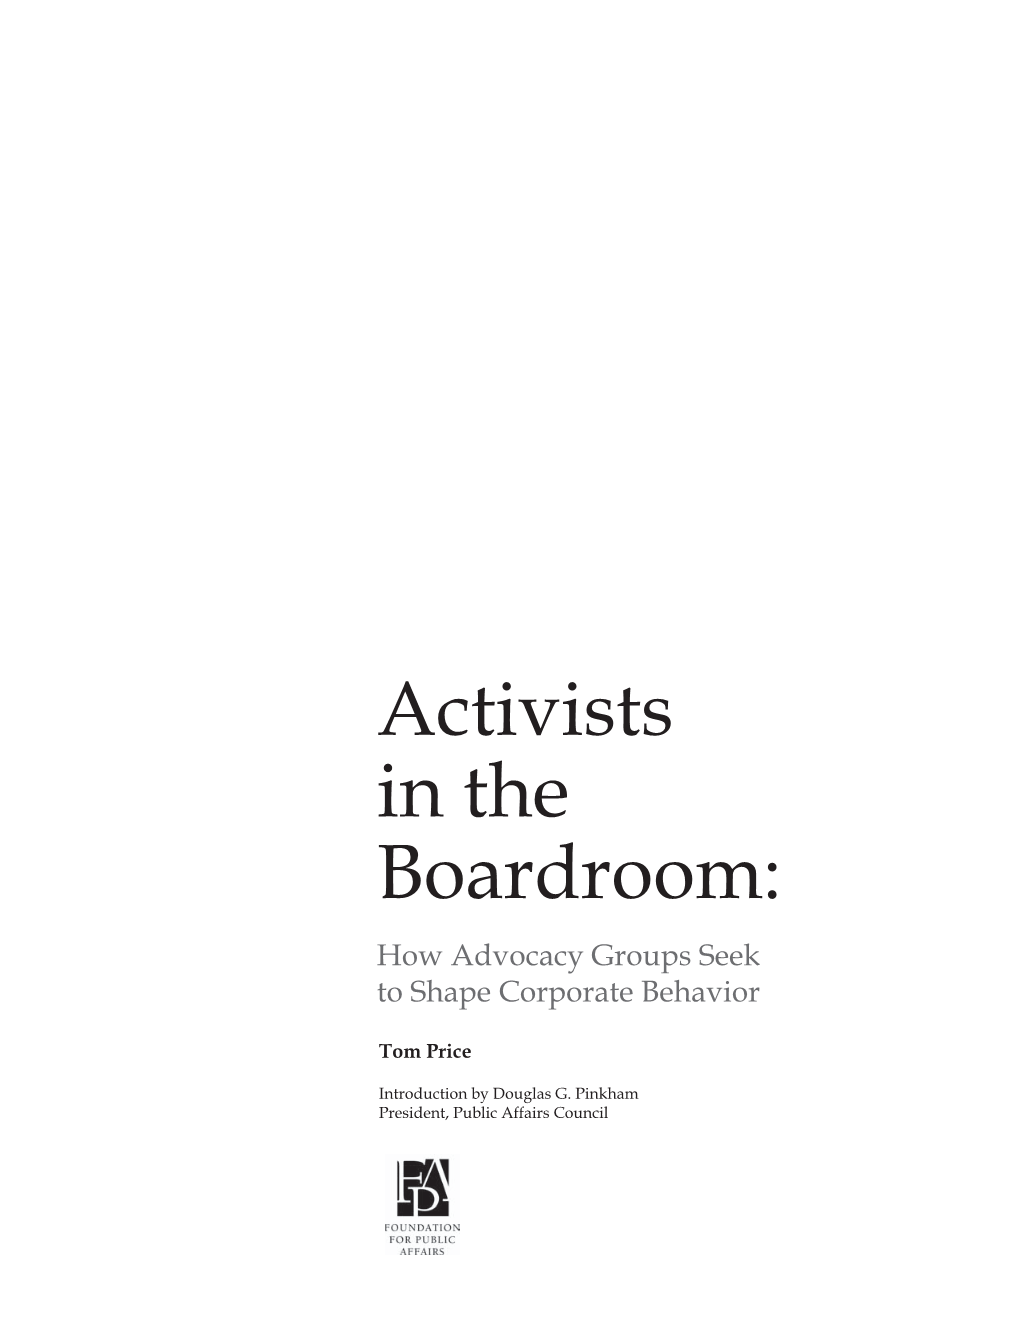 Activists in the Boardroom: How Advocacy Groups Seek to Shape Corporate Behavior